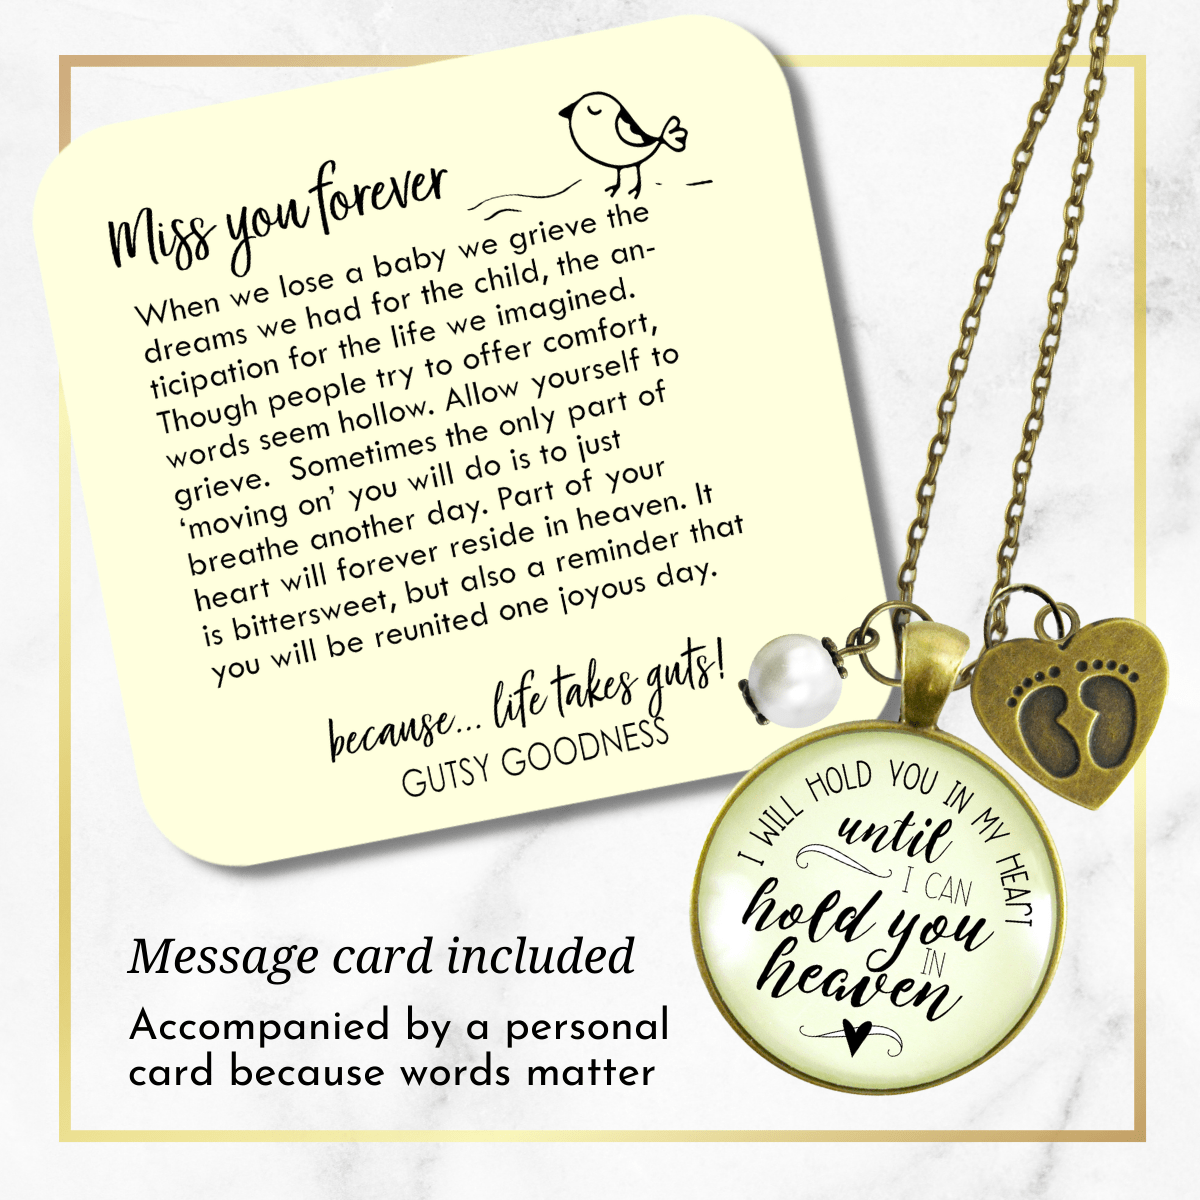 Gutsy Goodness Miscarriage Necklace Hold You in Heart Baby Remembrance Jewelry Gift - Gutsy Goodness Handmade Jewelry;Miscarriage Necklace Hold You In Heart Baby Remembrance Jewelry Gift - Gutsy Goodness Handmade Jewelry Gifts